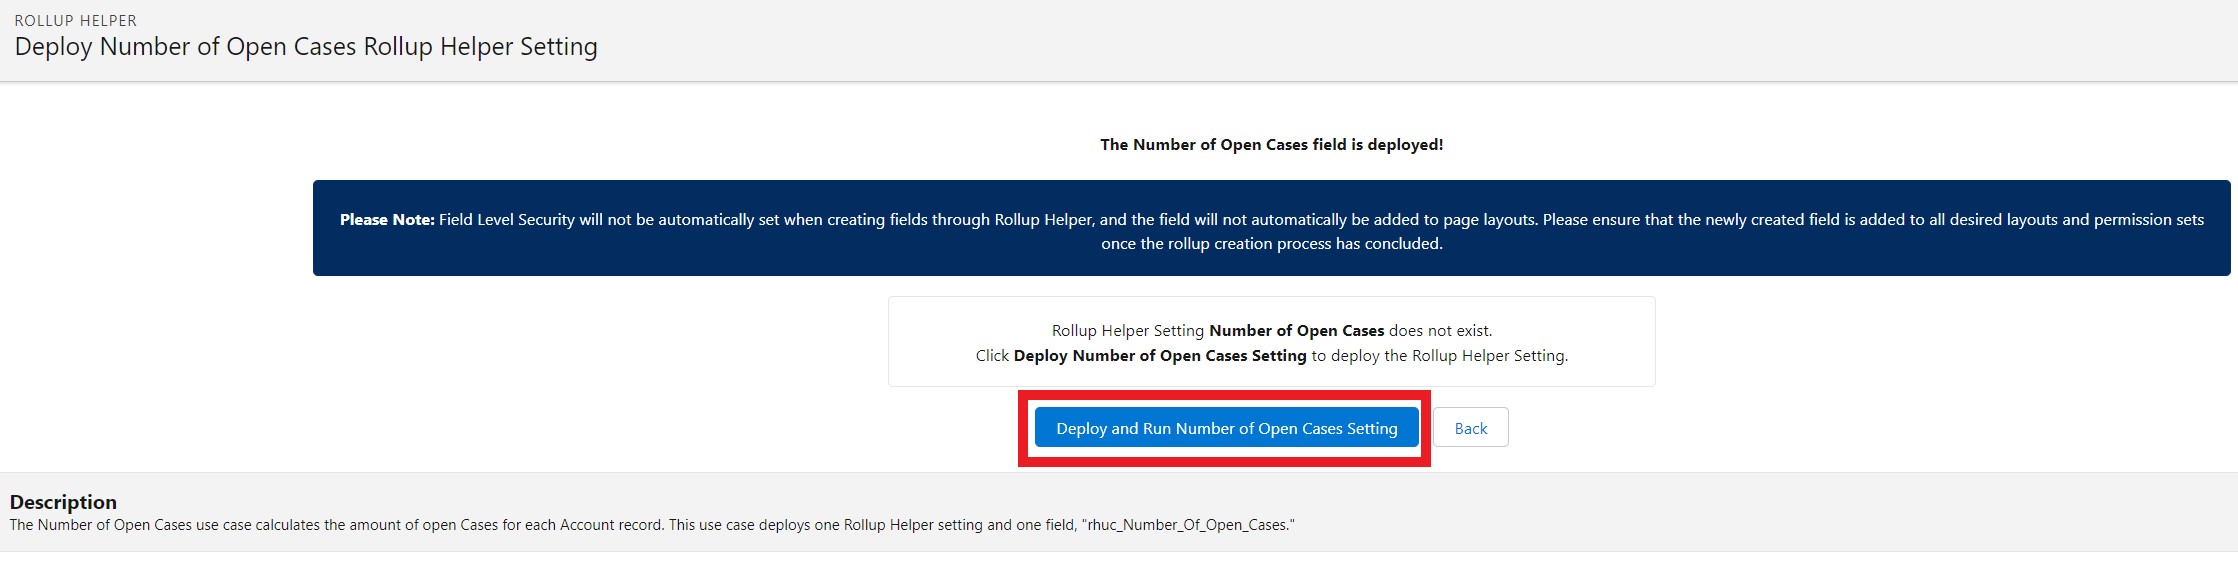 Number of Open Cases deploy setting